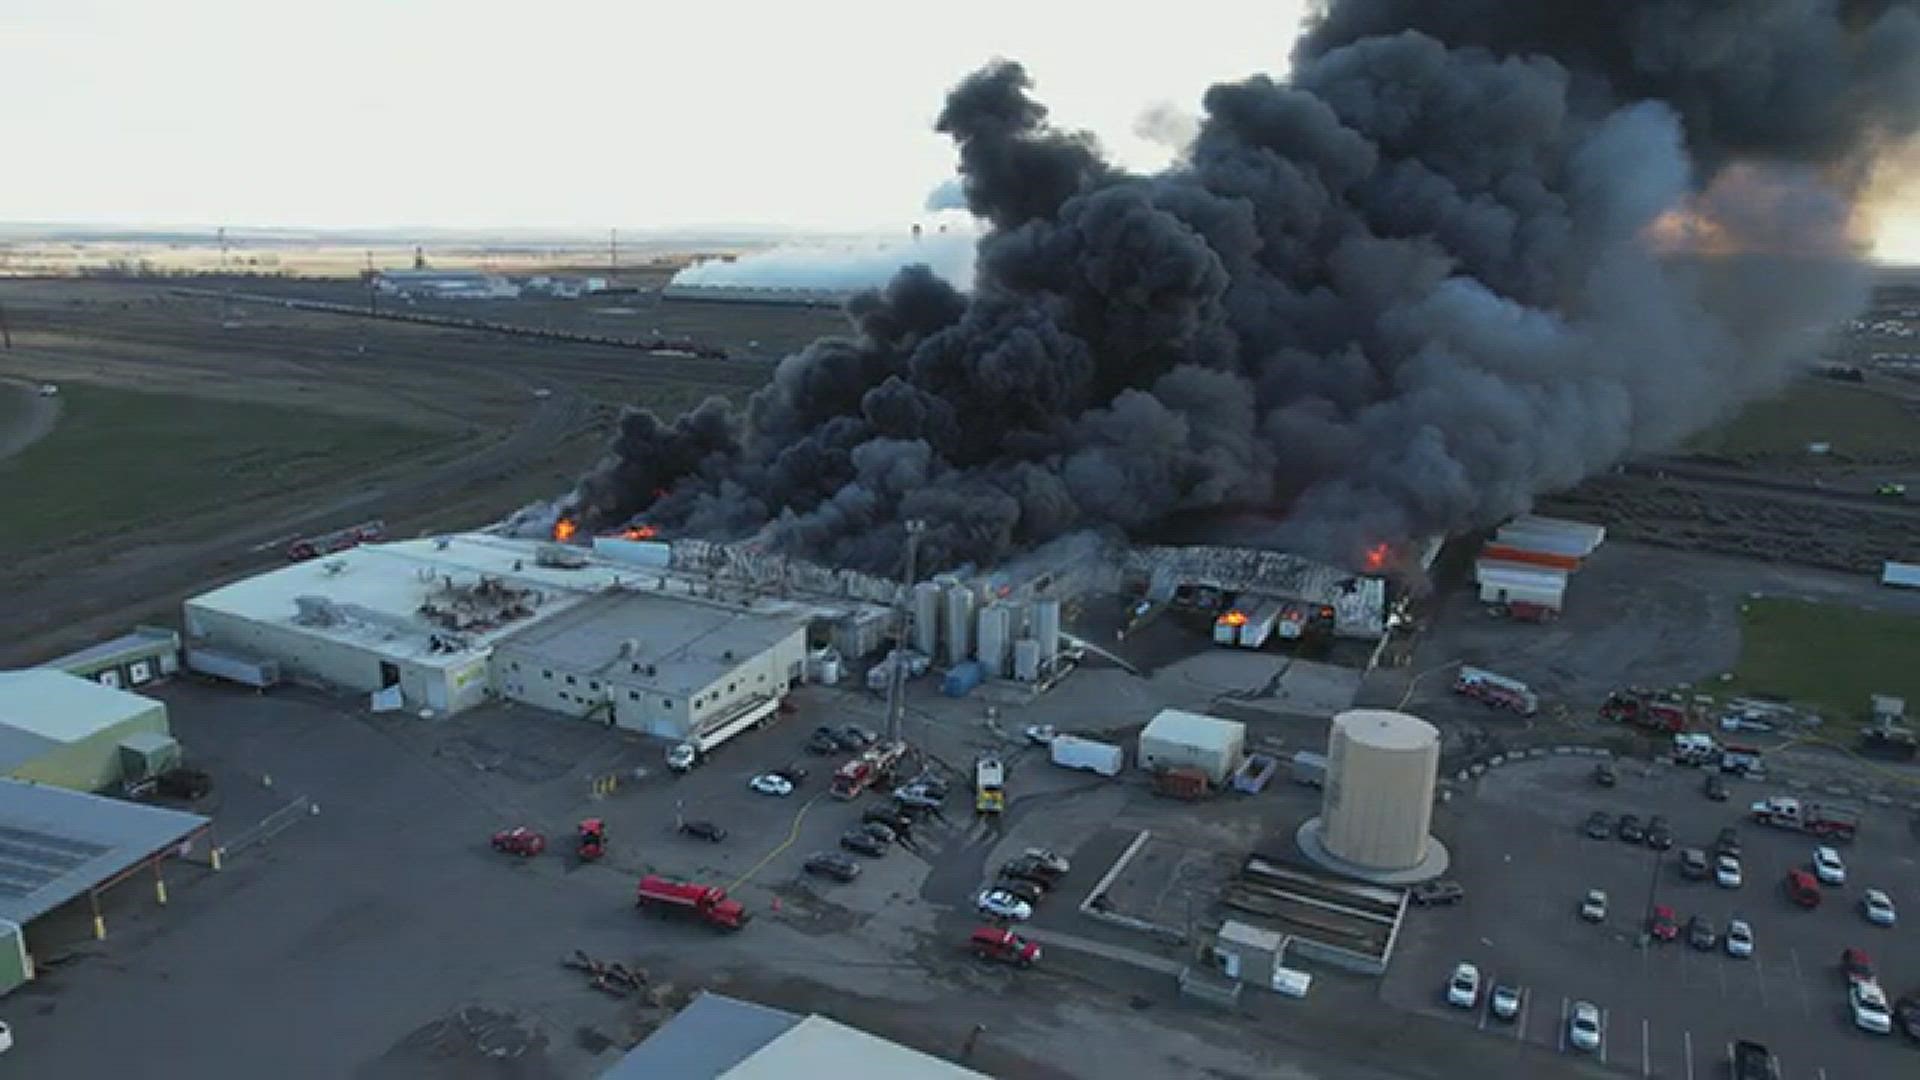 Shearer's Foods in Hermiston burned after a reported explosion on Tuesday, Feb. 22.